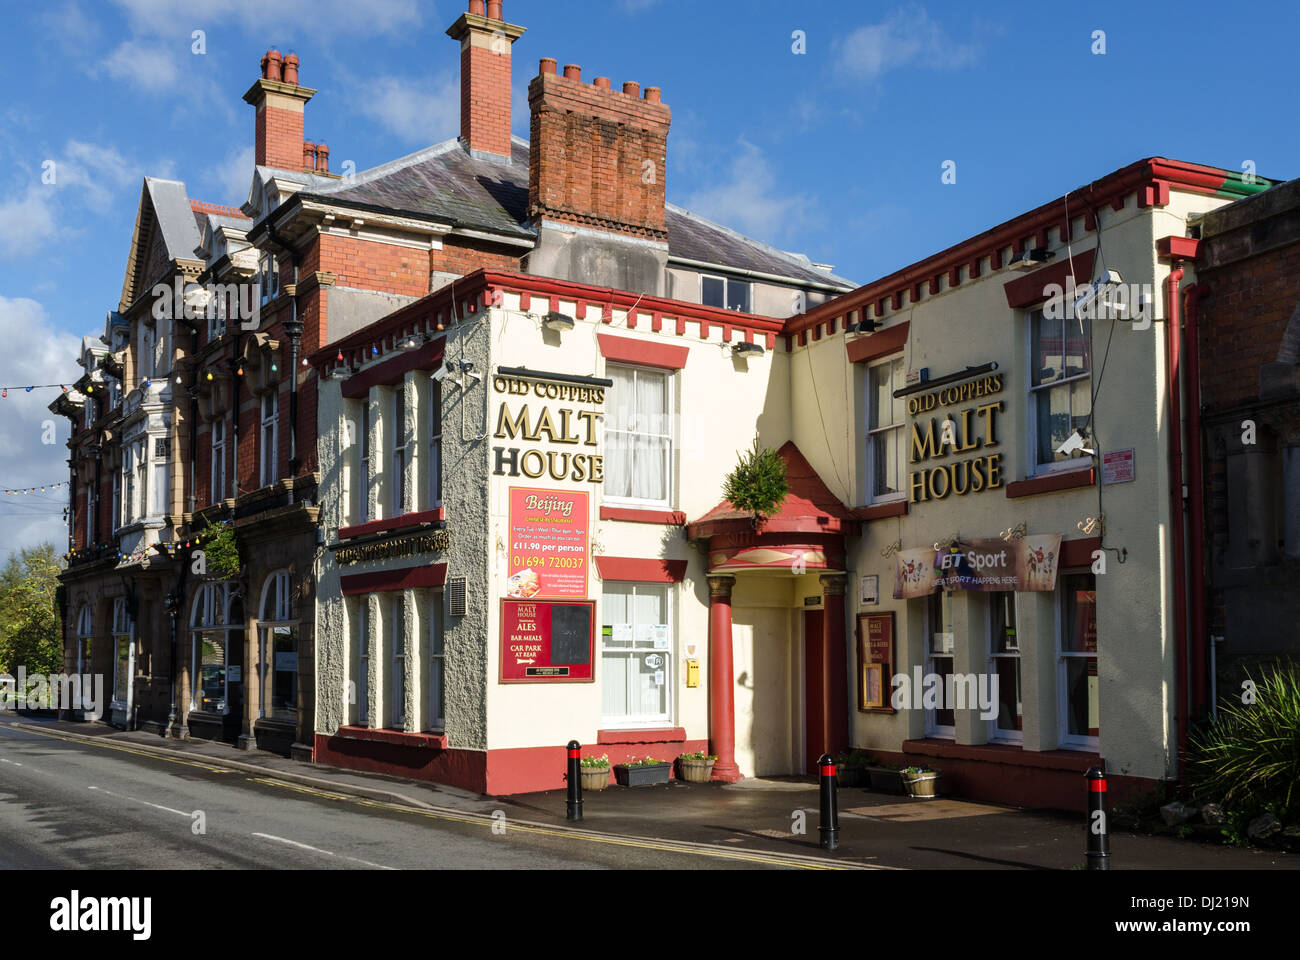 Old Coppers Malt House public house in Church Stretton, Shropshire Stock Photo